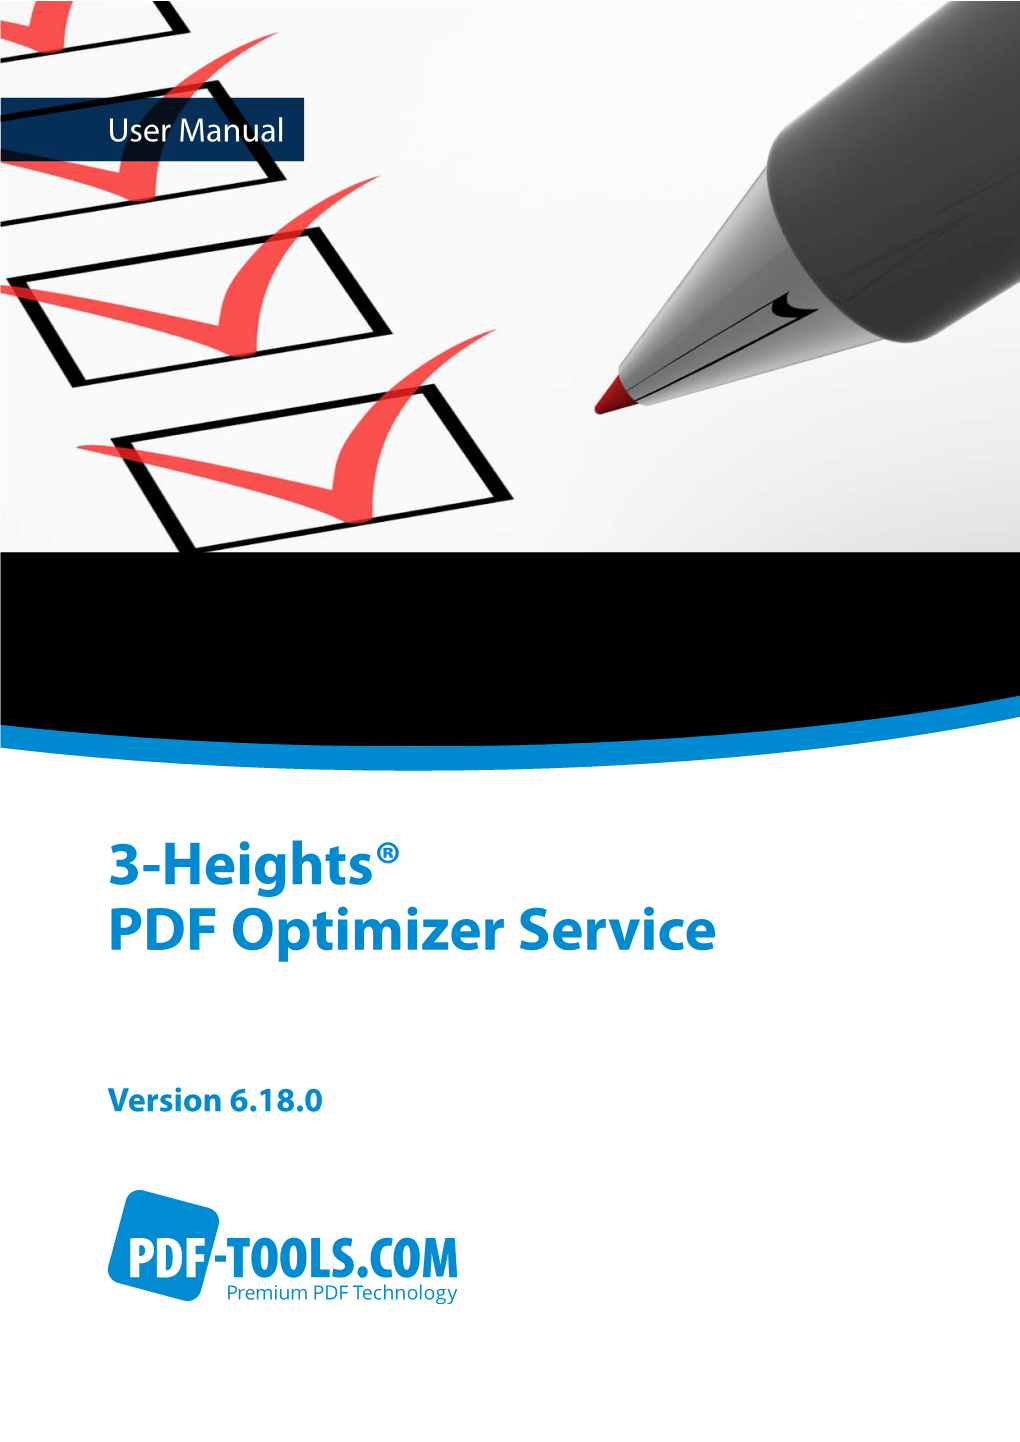 3-Heights® PDF Optimizer Service